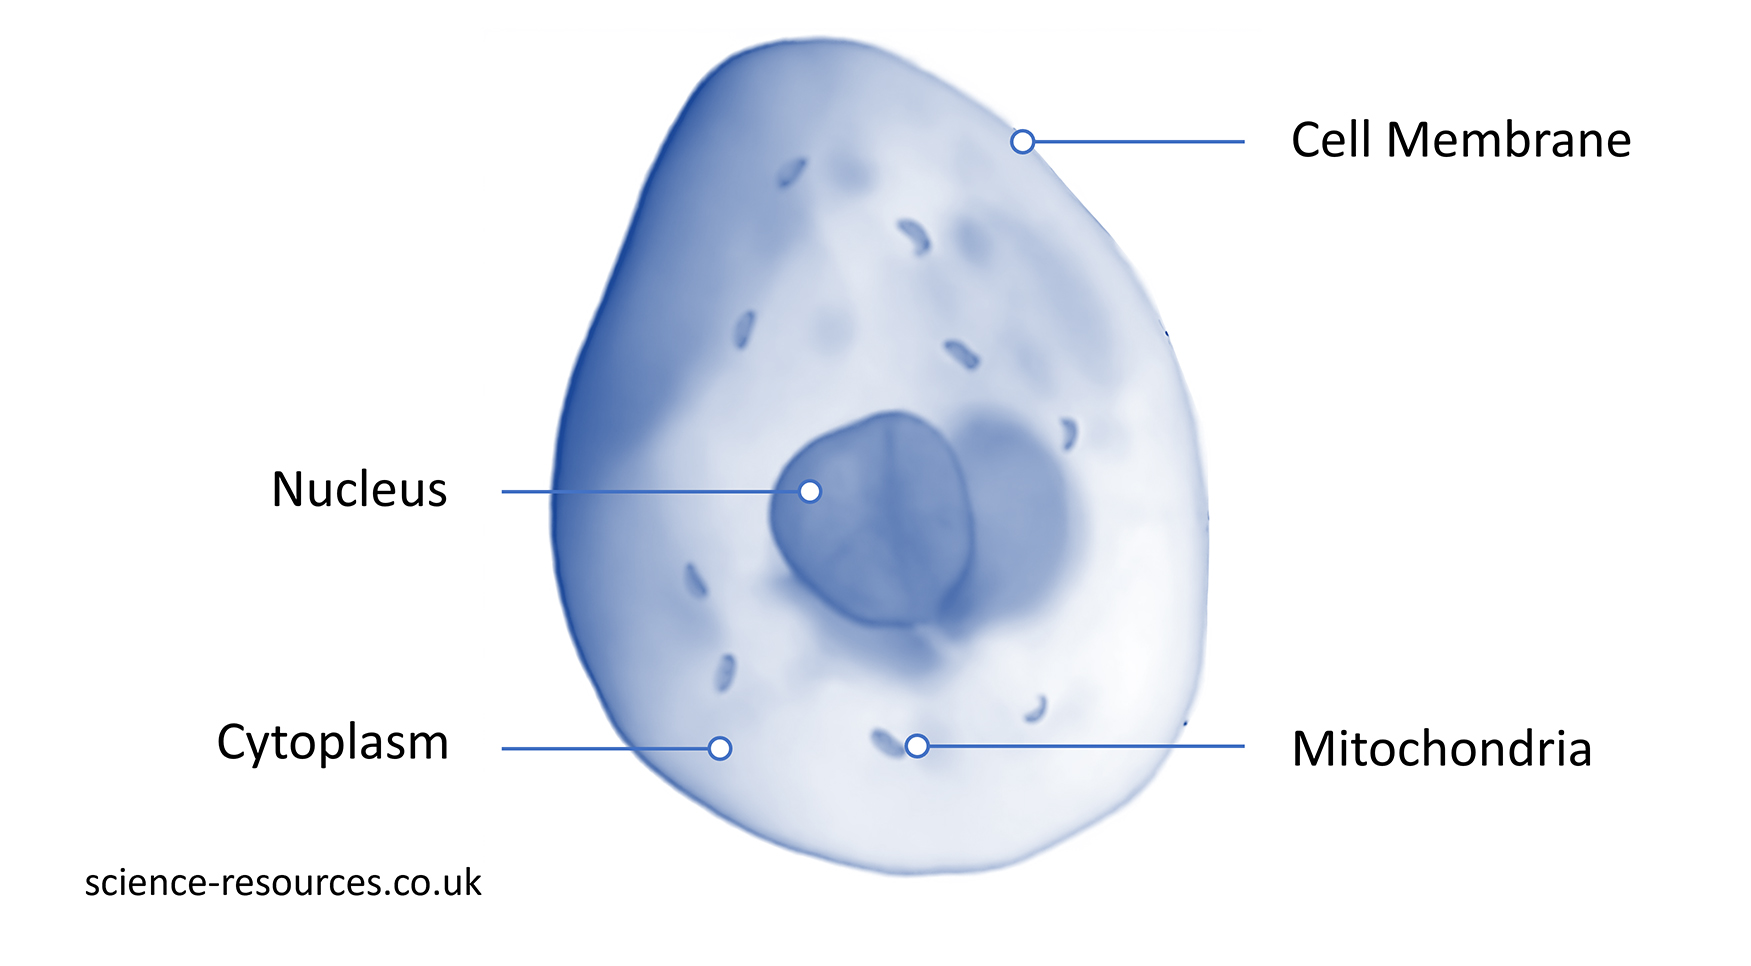 Image of an animal cell showing its four main parts: nucleus, cytoplasm, cell membrane, and mitochondria.